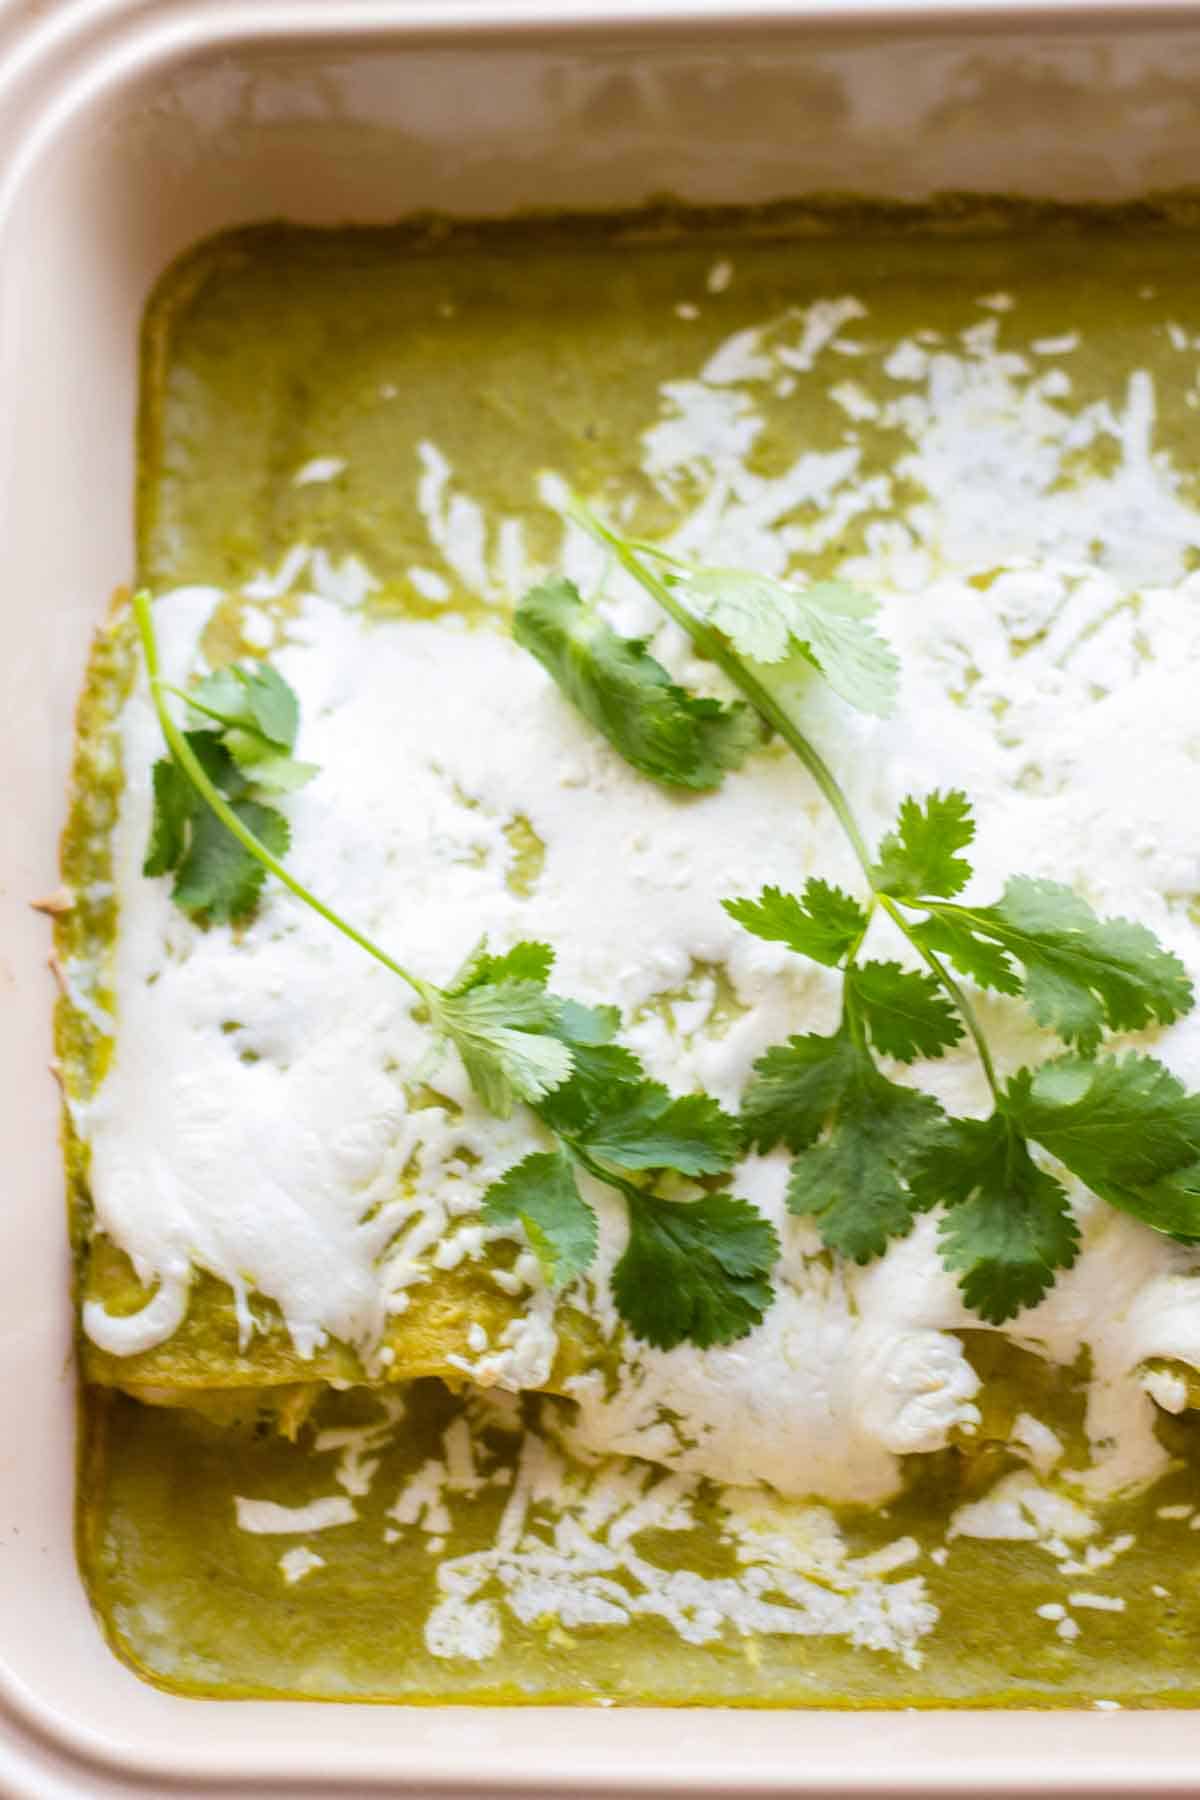 Close up of a tray of enchiladas Suizas verdes with cilantro on top.